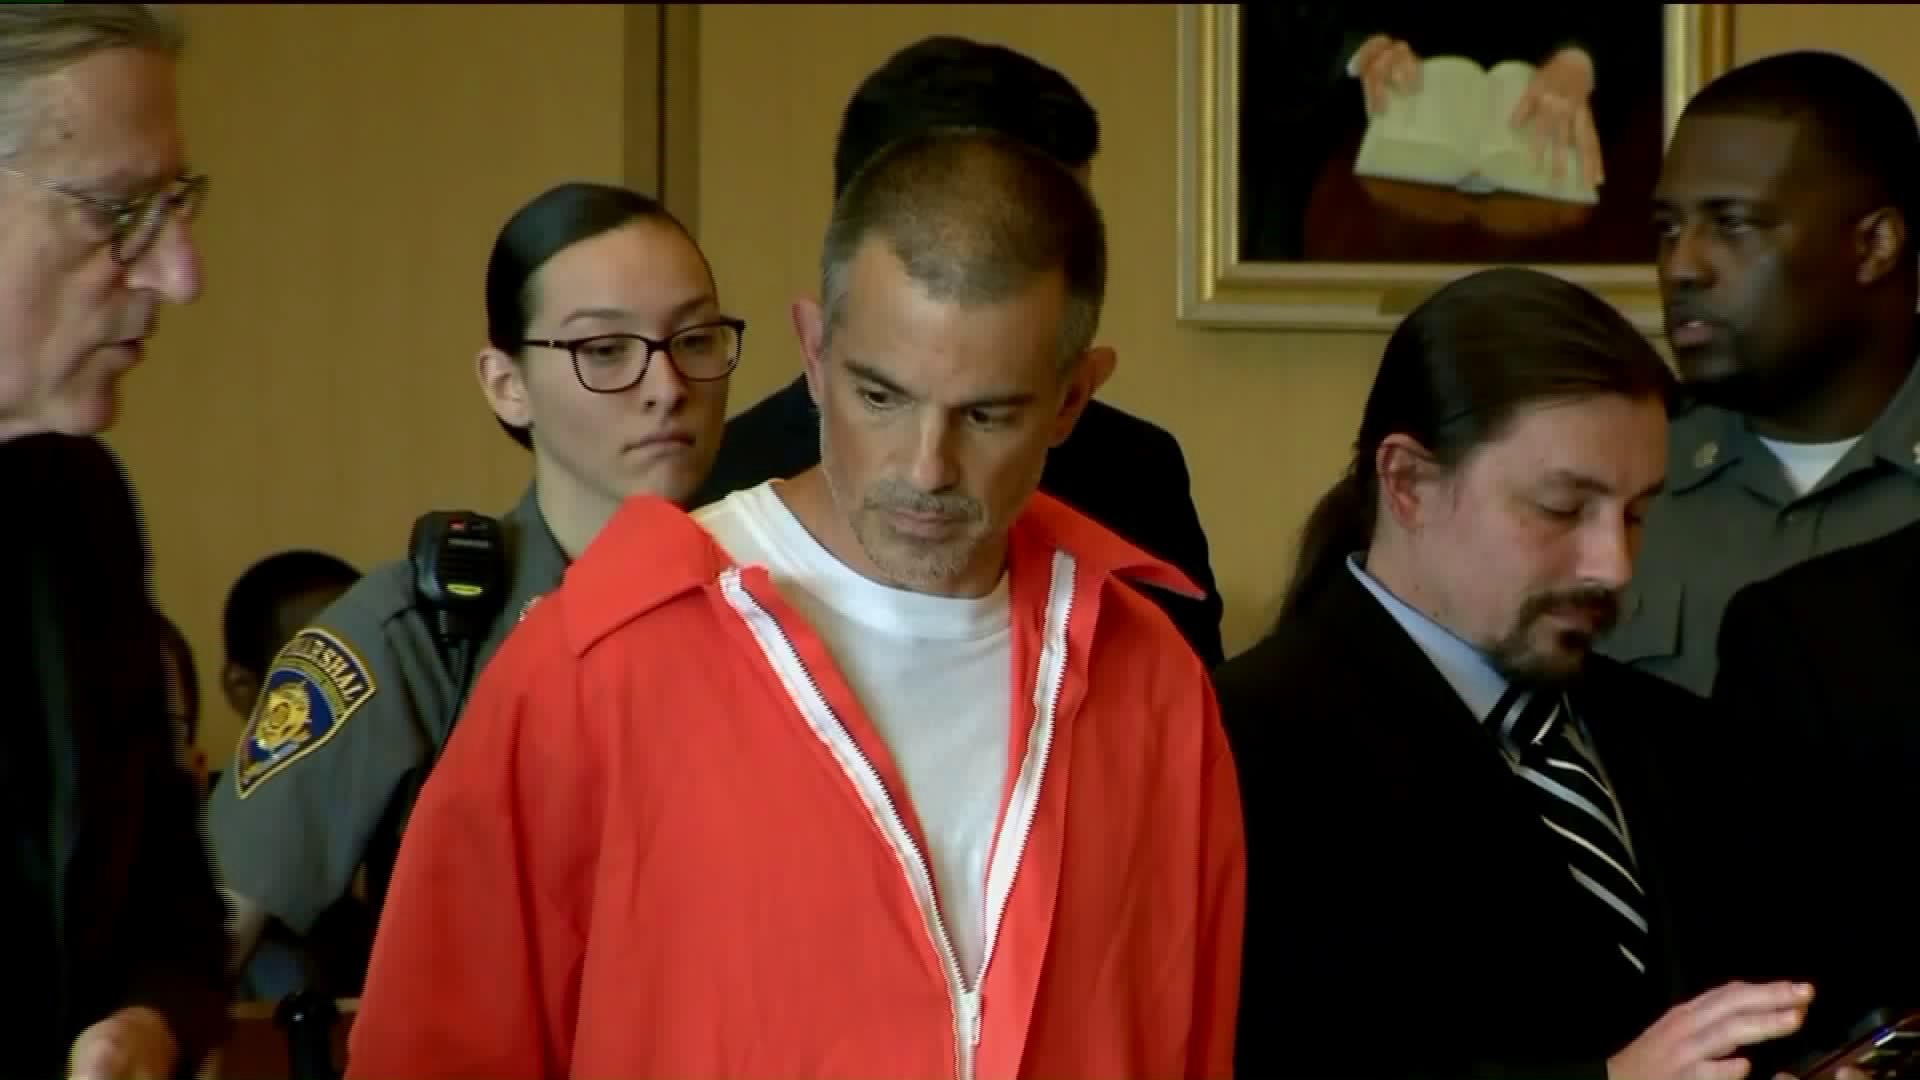 Fotis Dulos may not have had enough collateral to post bond